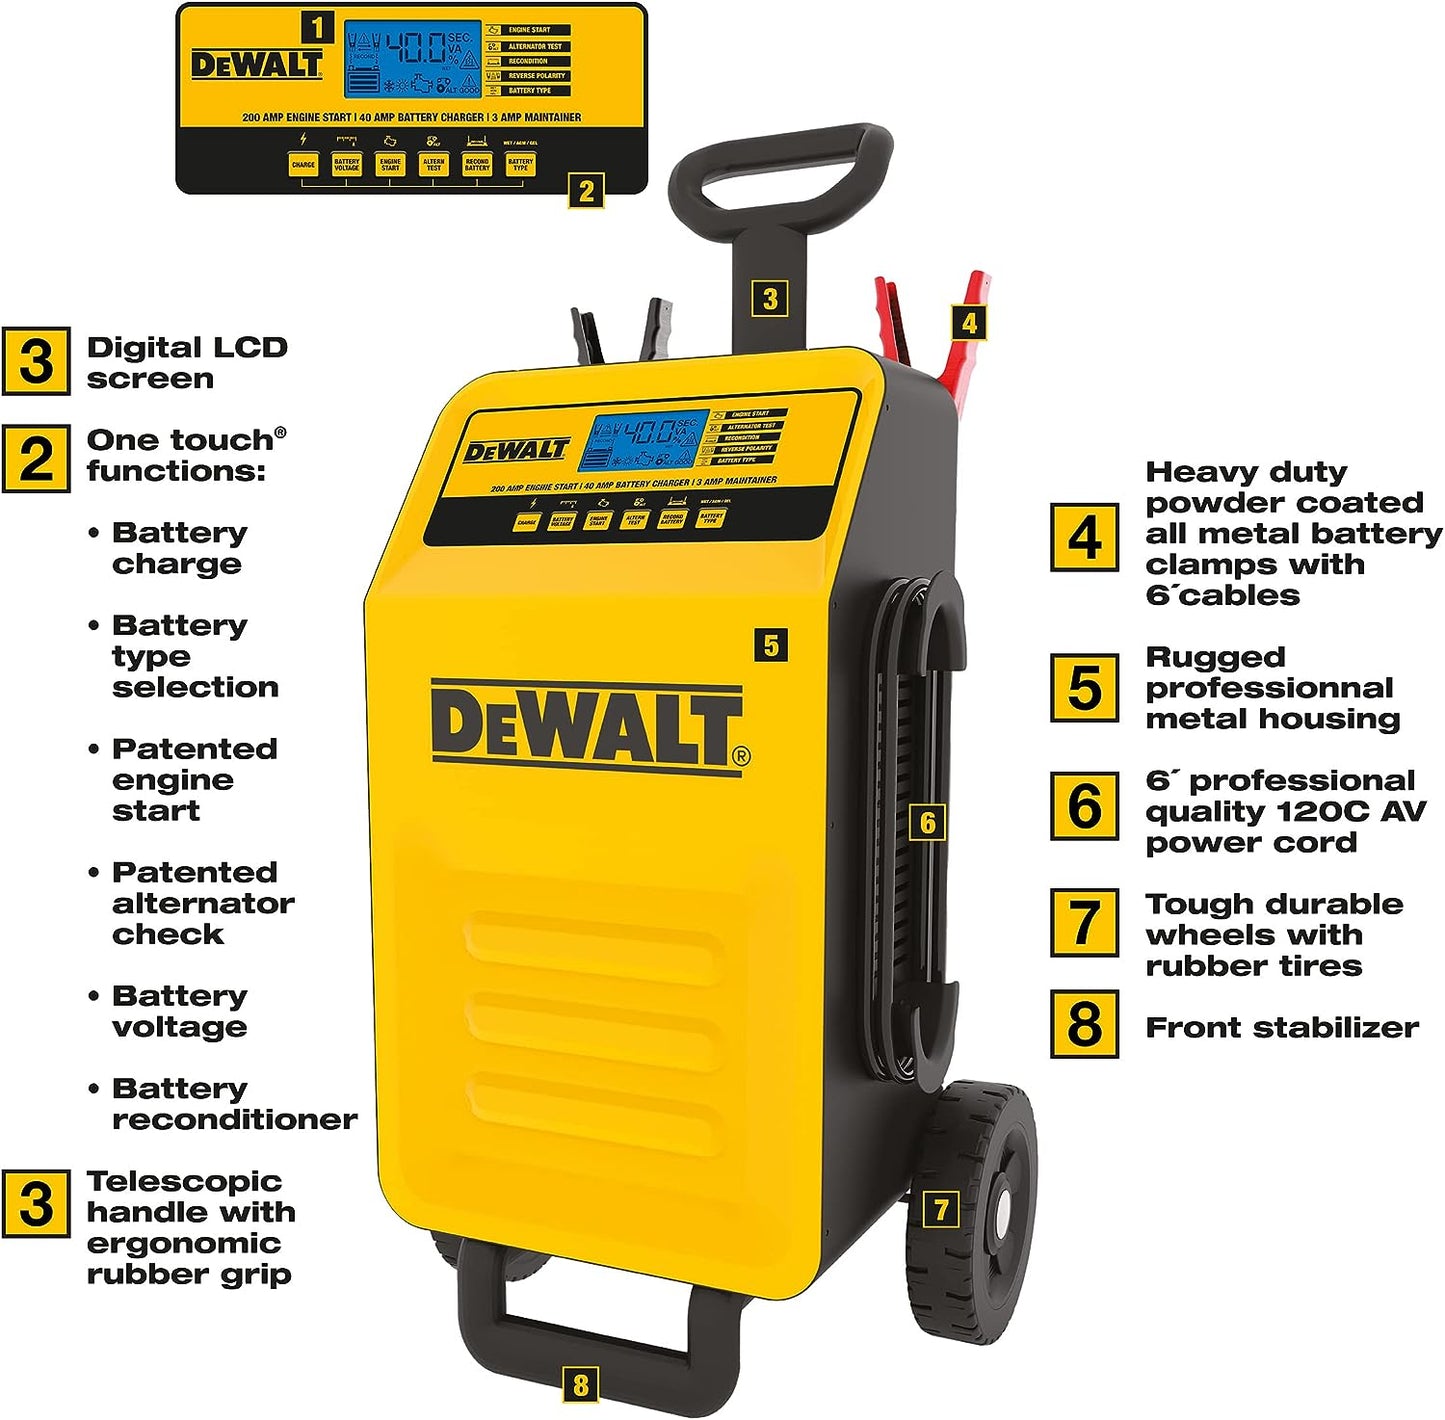 DEWALT DXAEC200 DXAE200 Professional 40-Amp Rolling Battery Charger and 3-Amp Maintainer with 200-Amp Engine Start, Yellow - E.S.N Tools